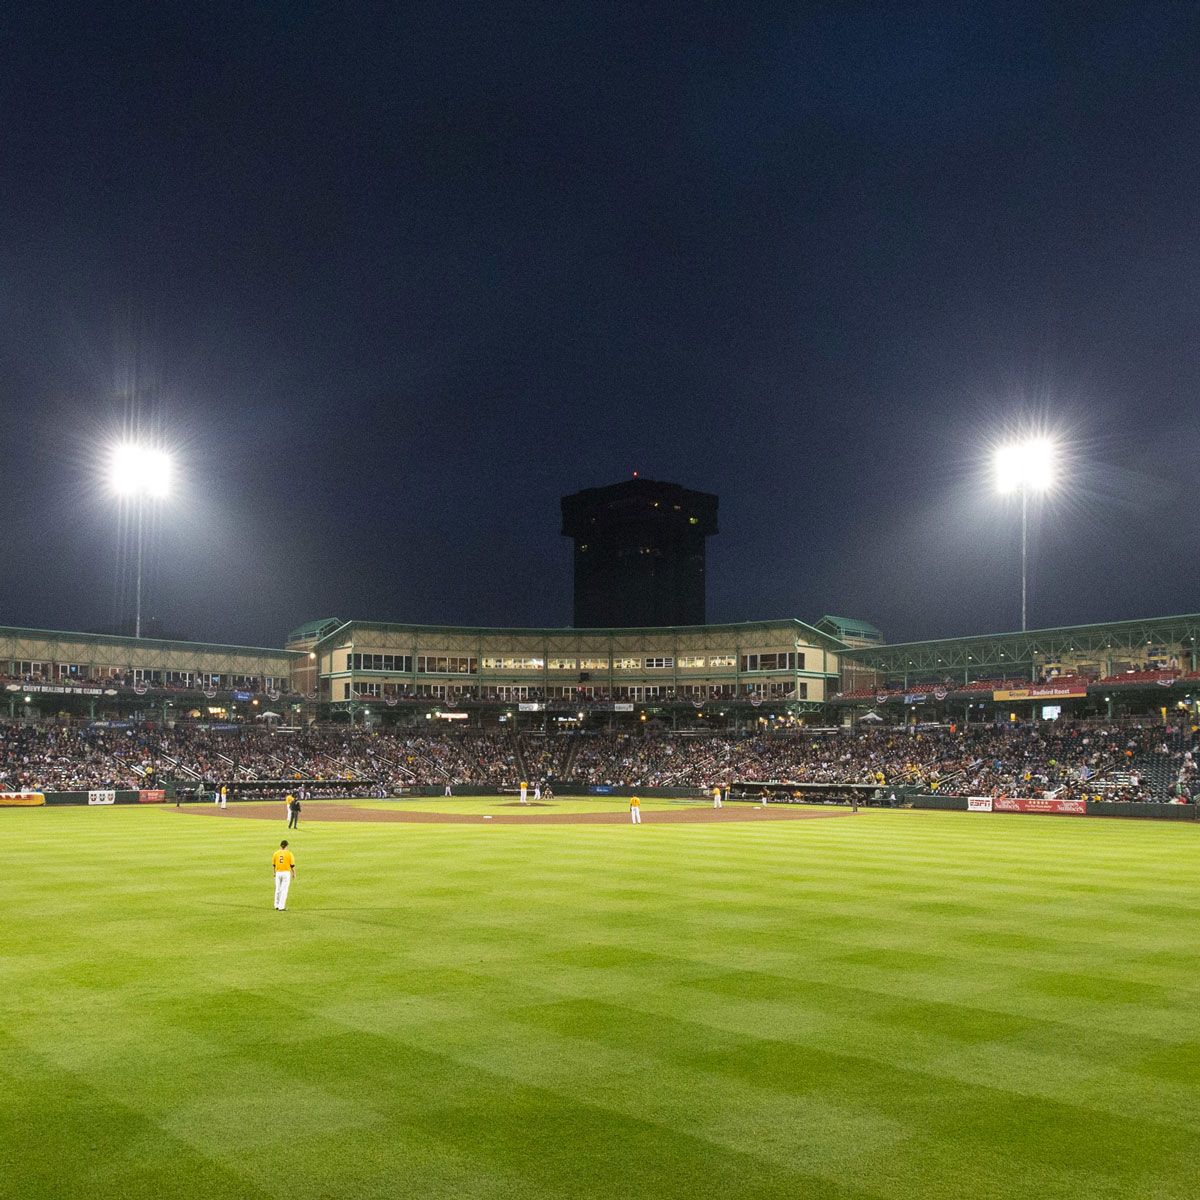 Nighttime at Hammons Field as seen from outfield